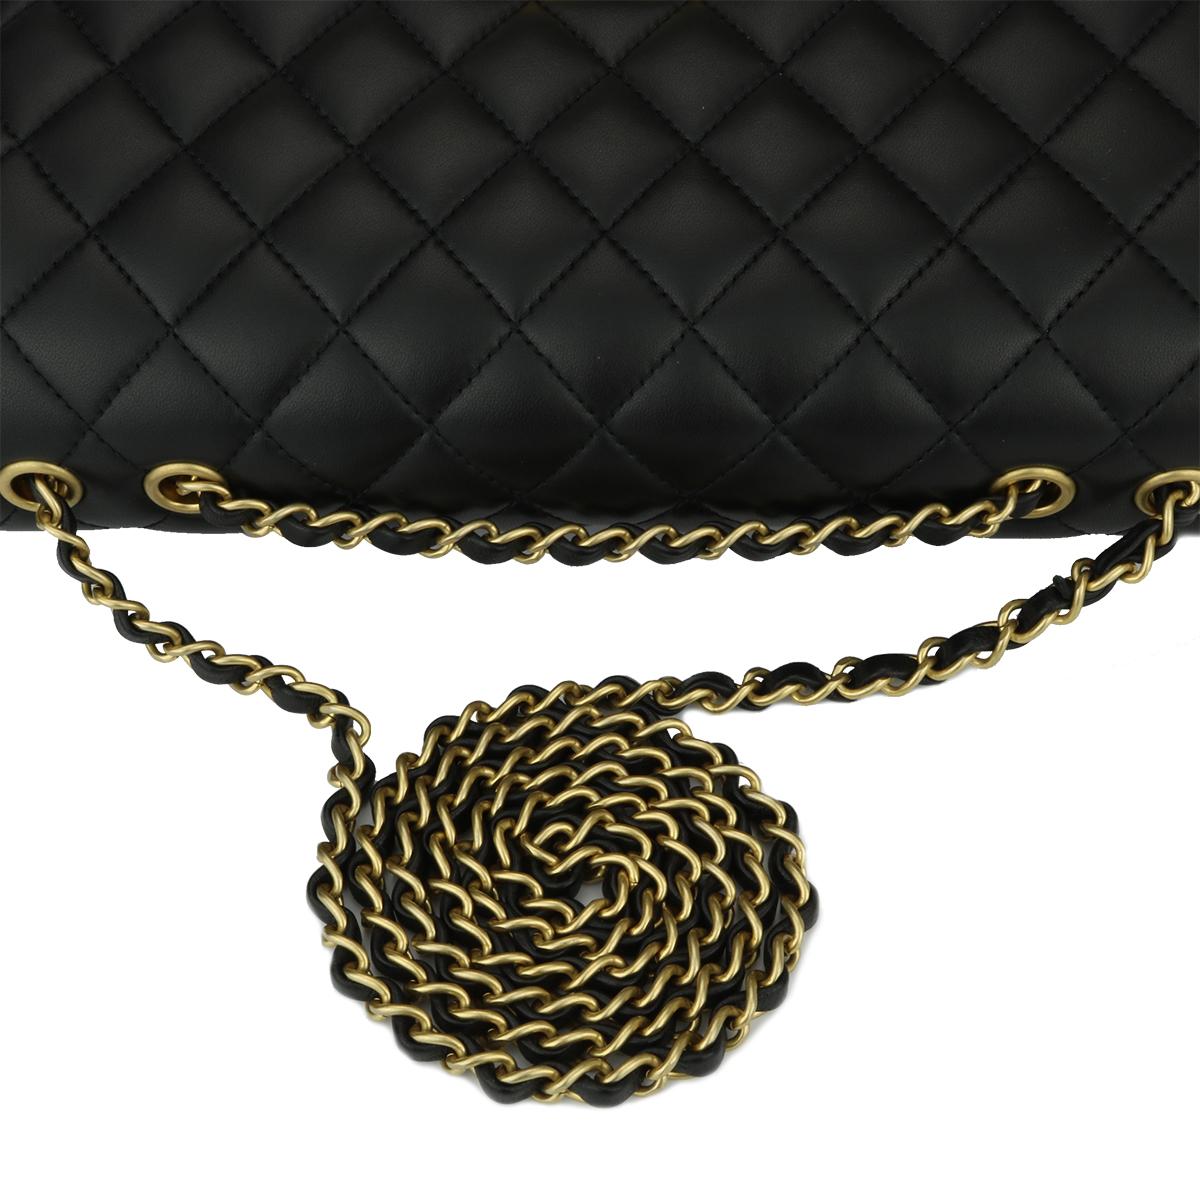 CHANEL CC Chic Flap Bag Black and Gold Lambskin with Brushed Gold Hardware 2019 5